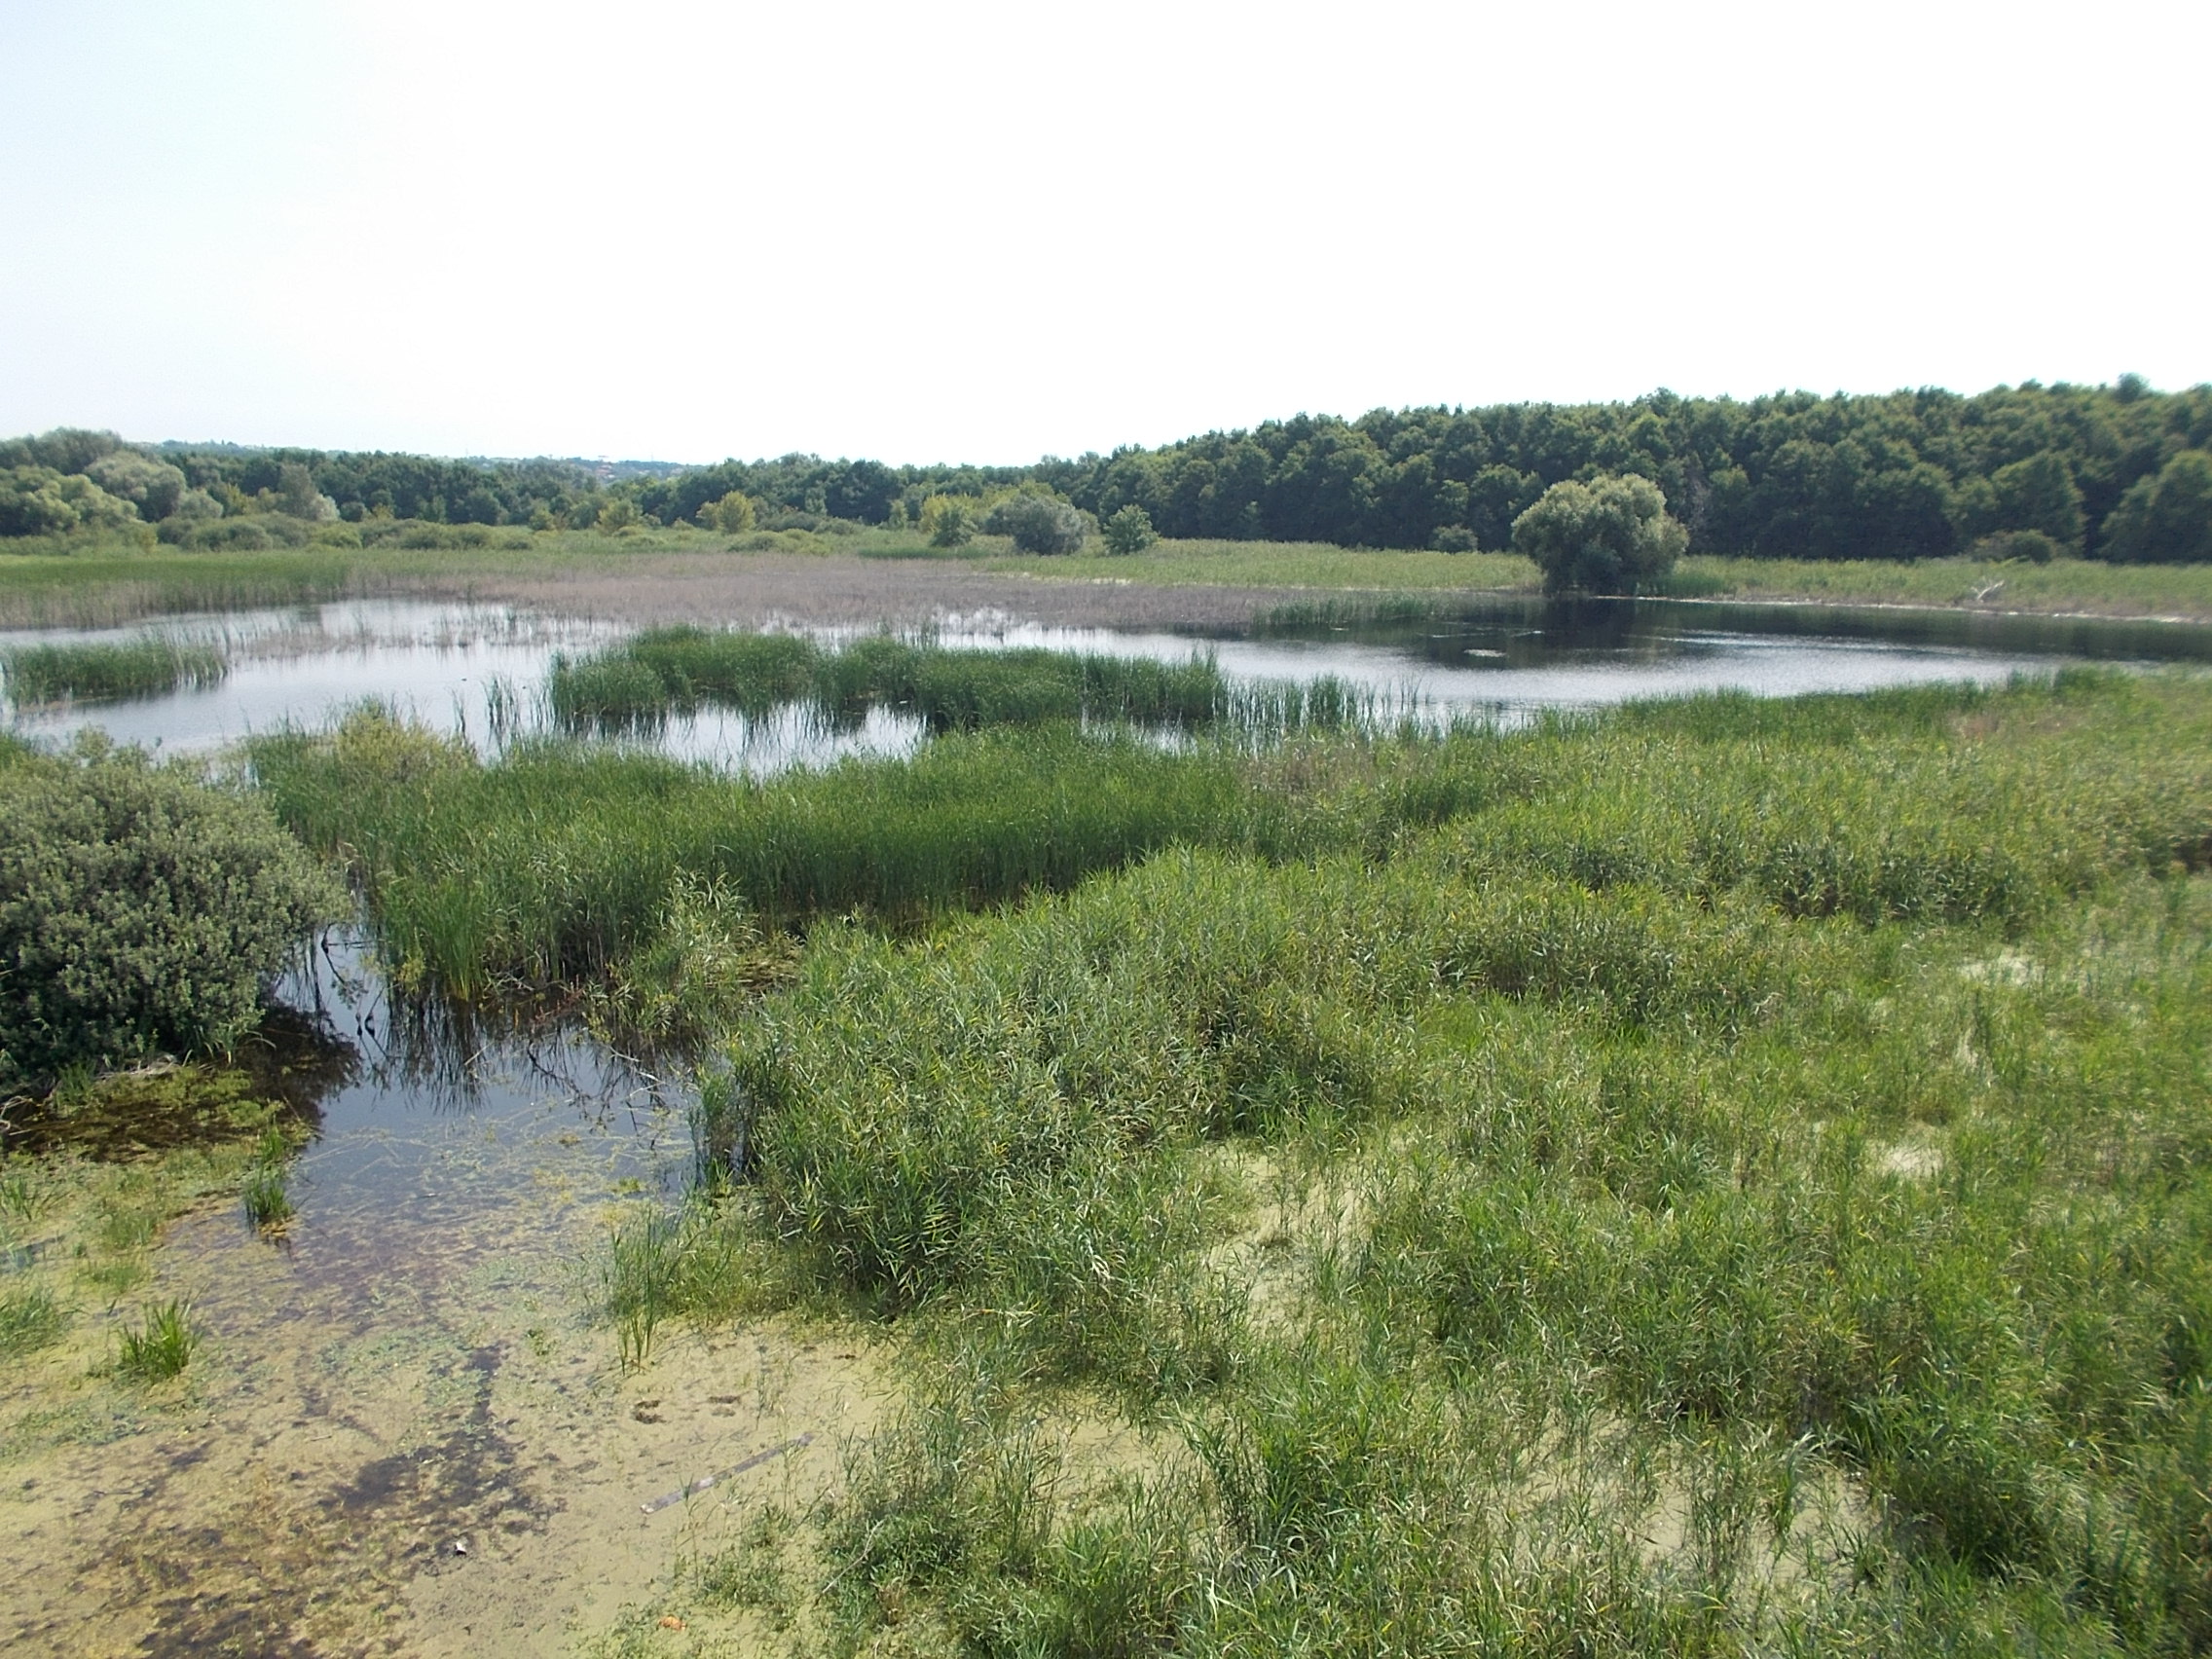 Budapest’s Only Marsh to be Saved